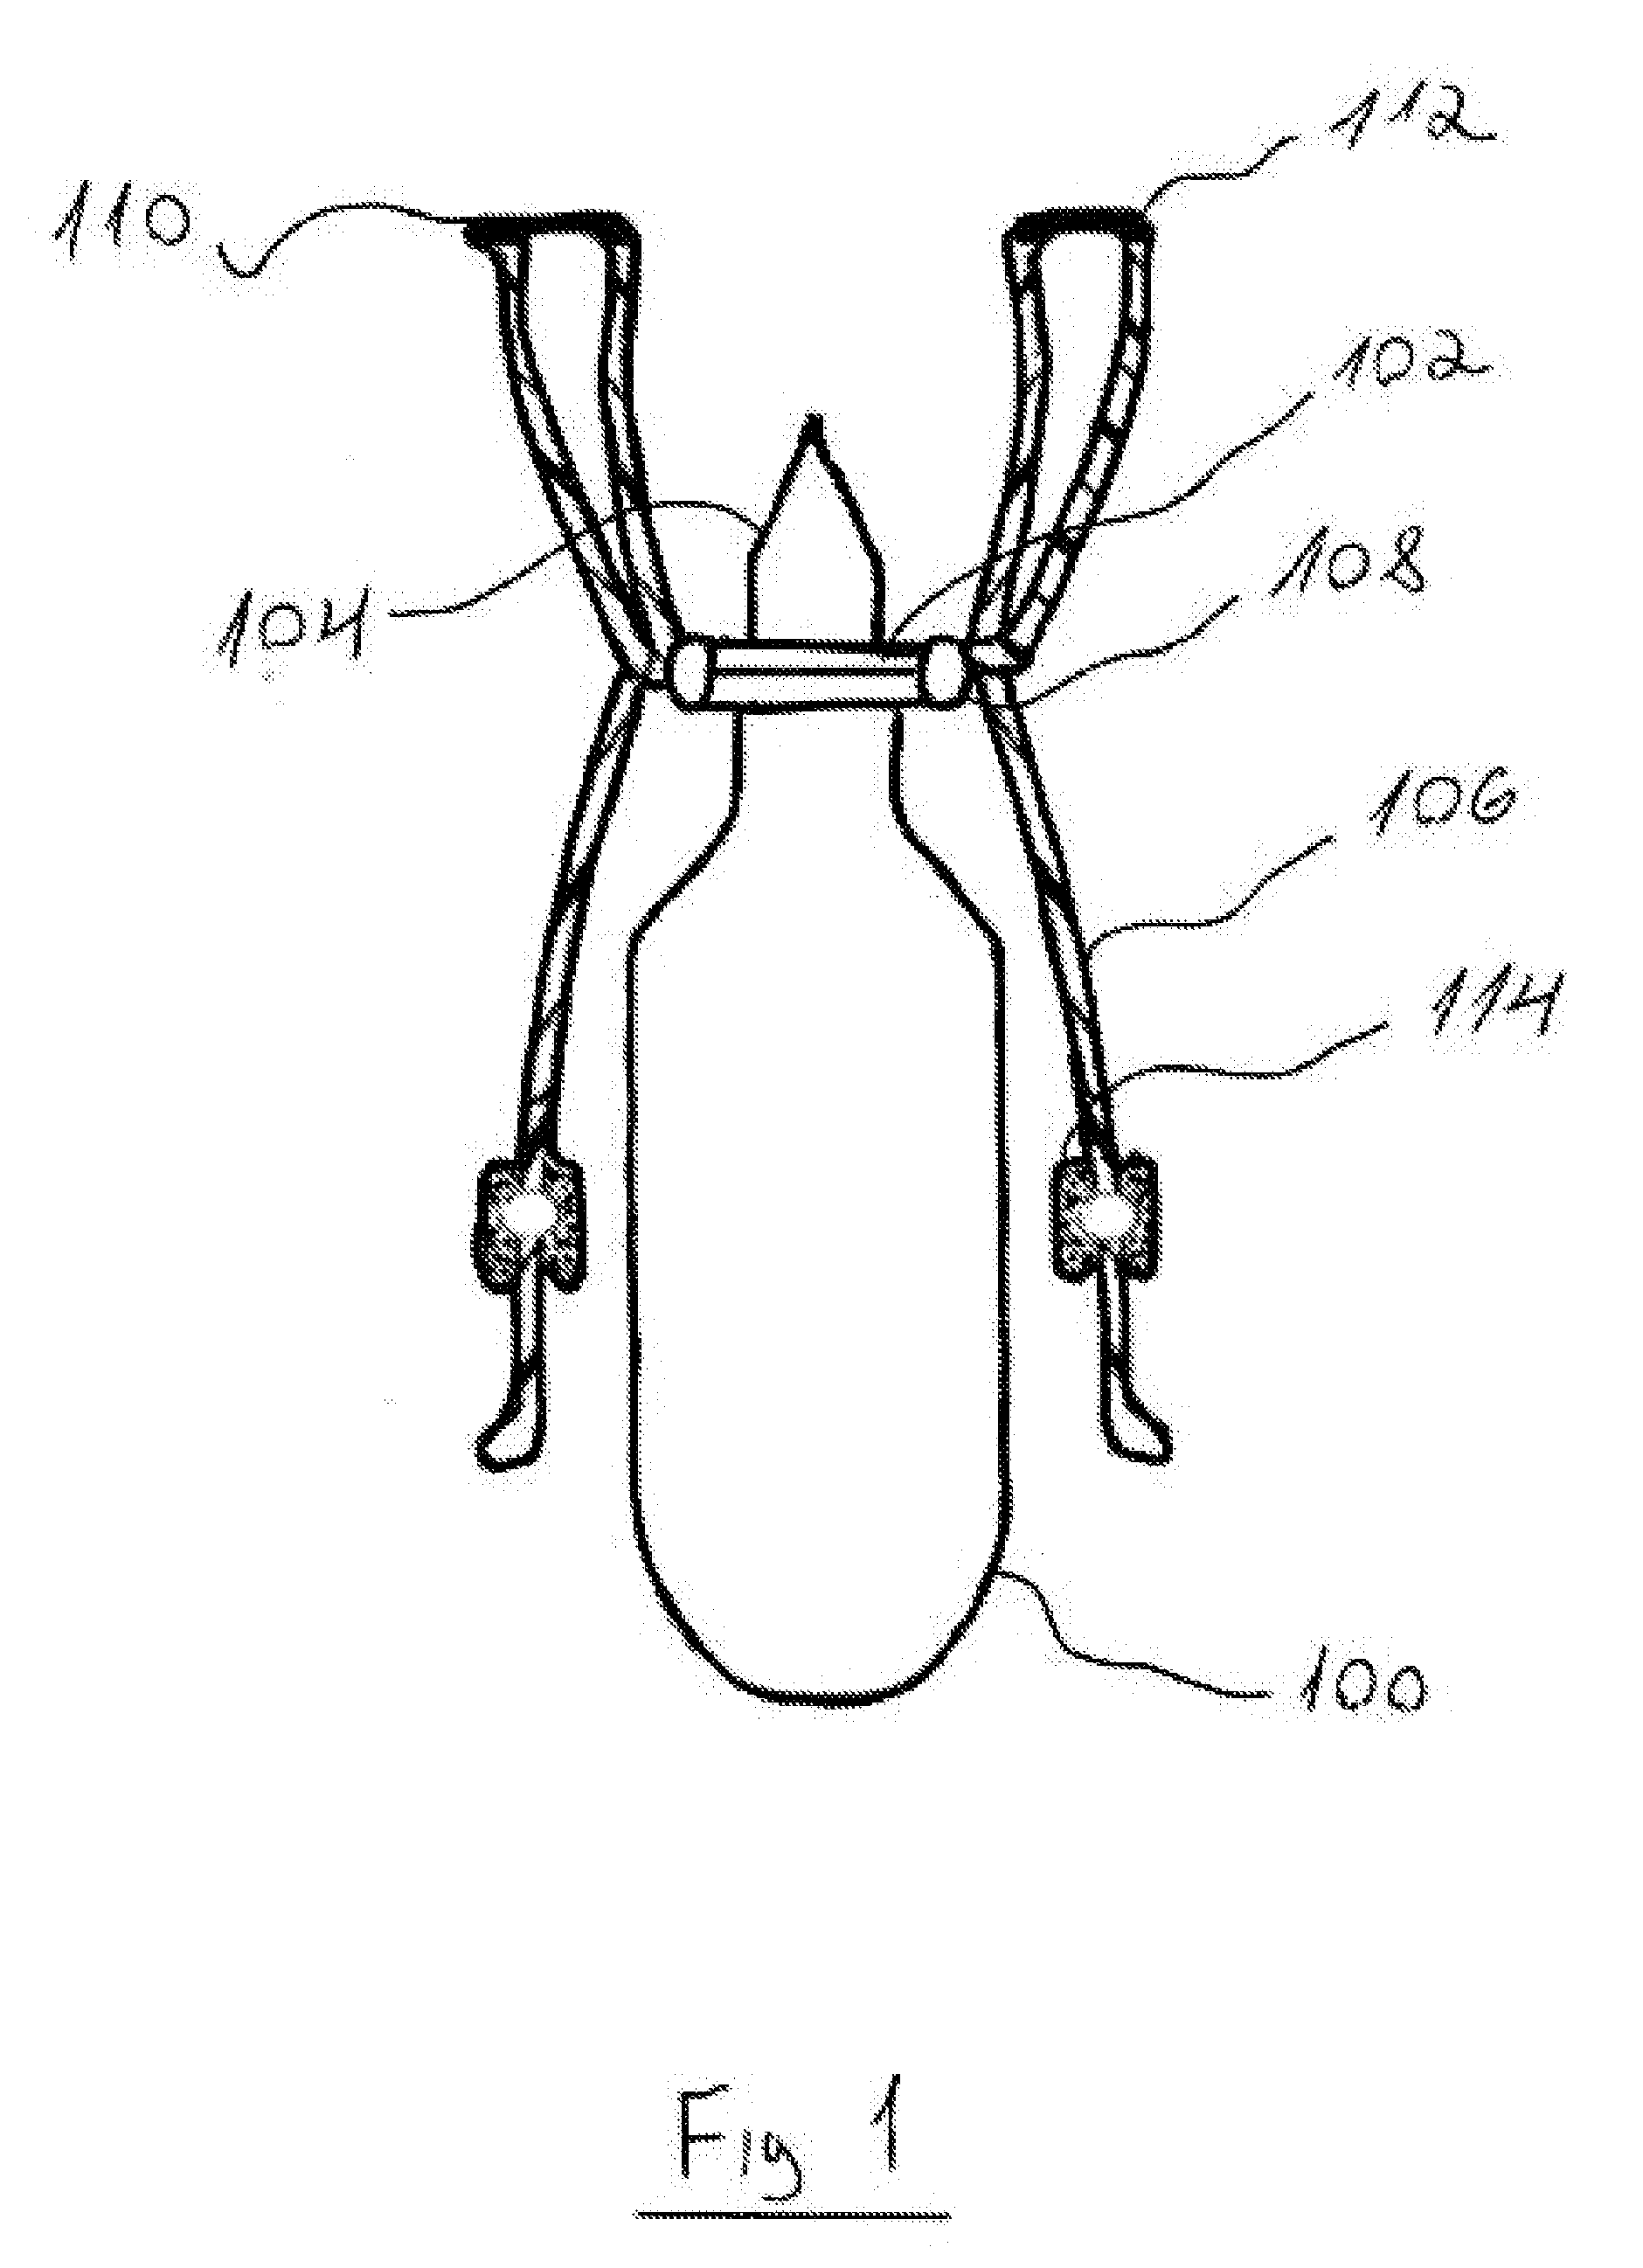 Method and Device for Applying Eye Drops